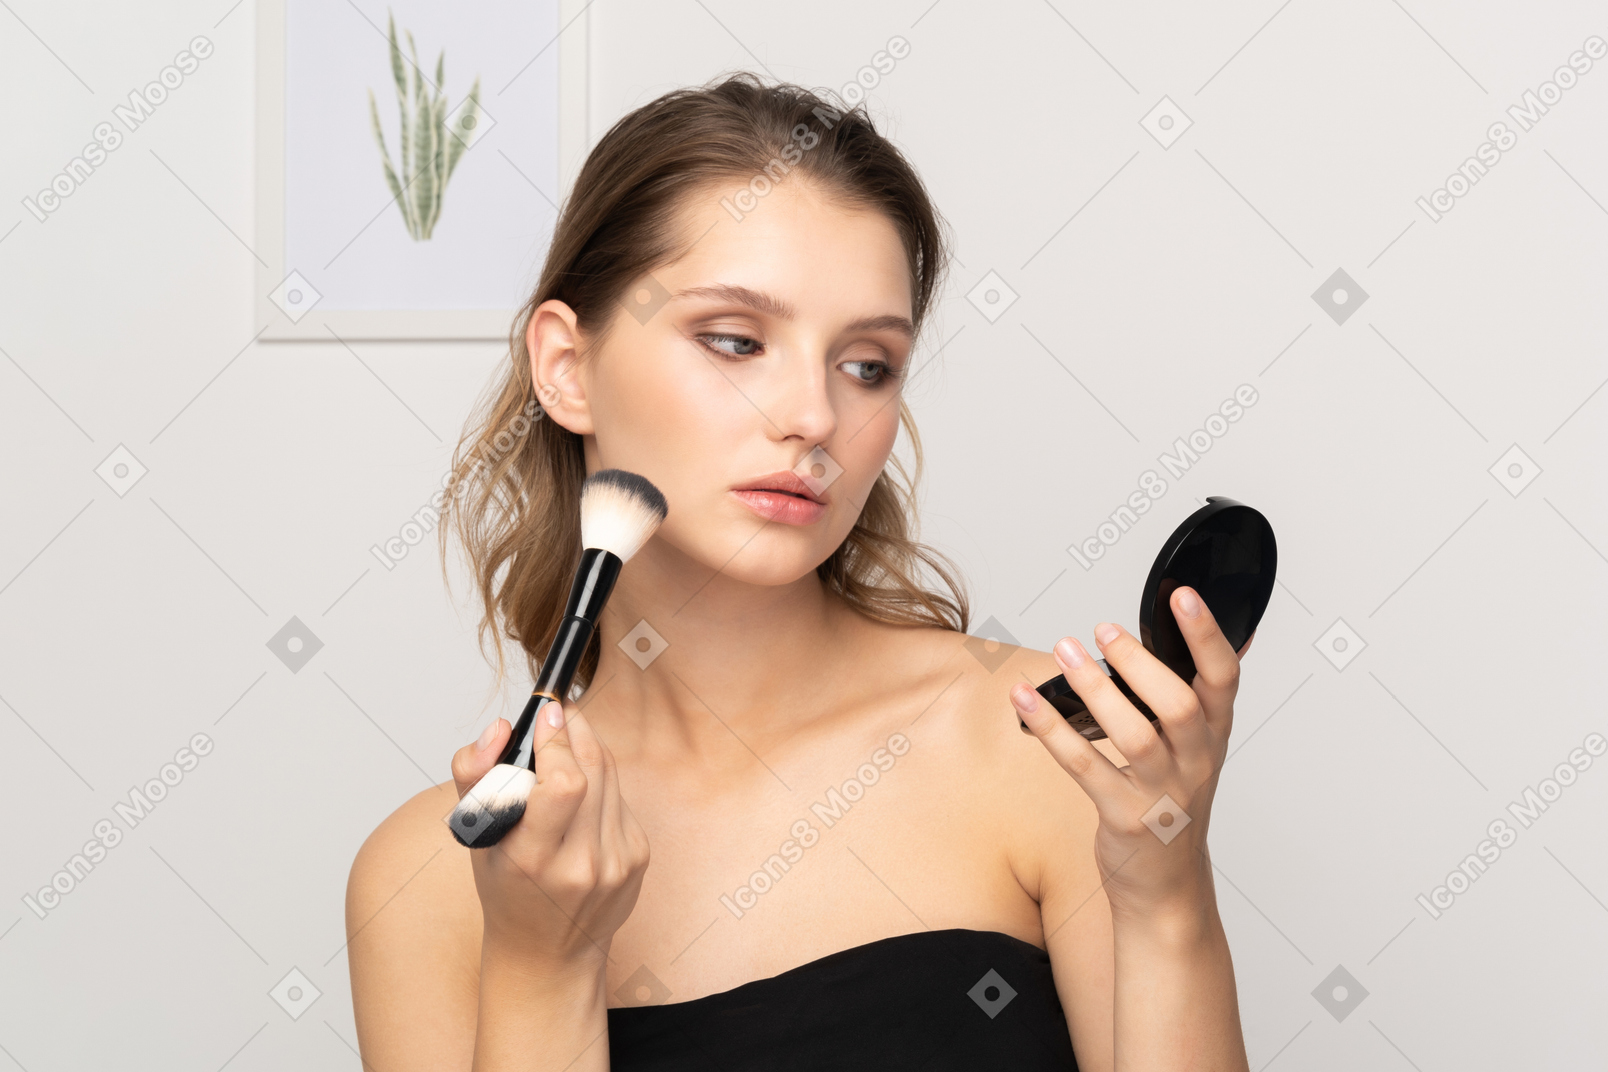 Front view of a young woman applying face powder while holding a mirror